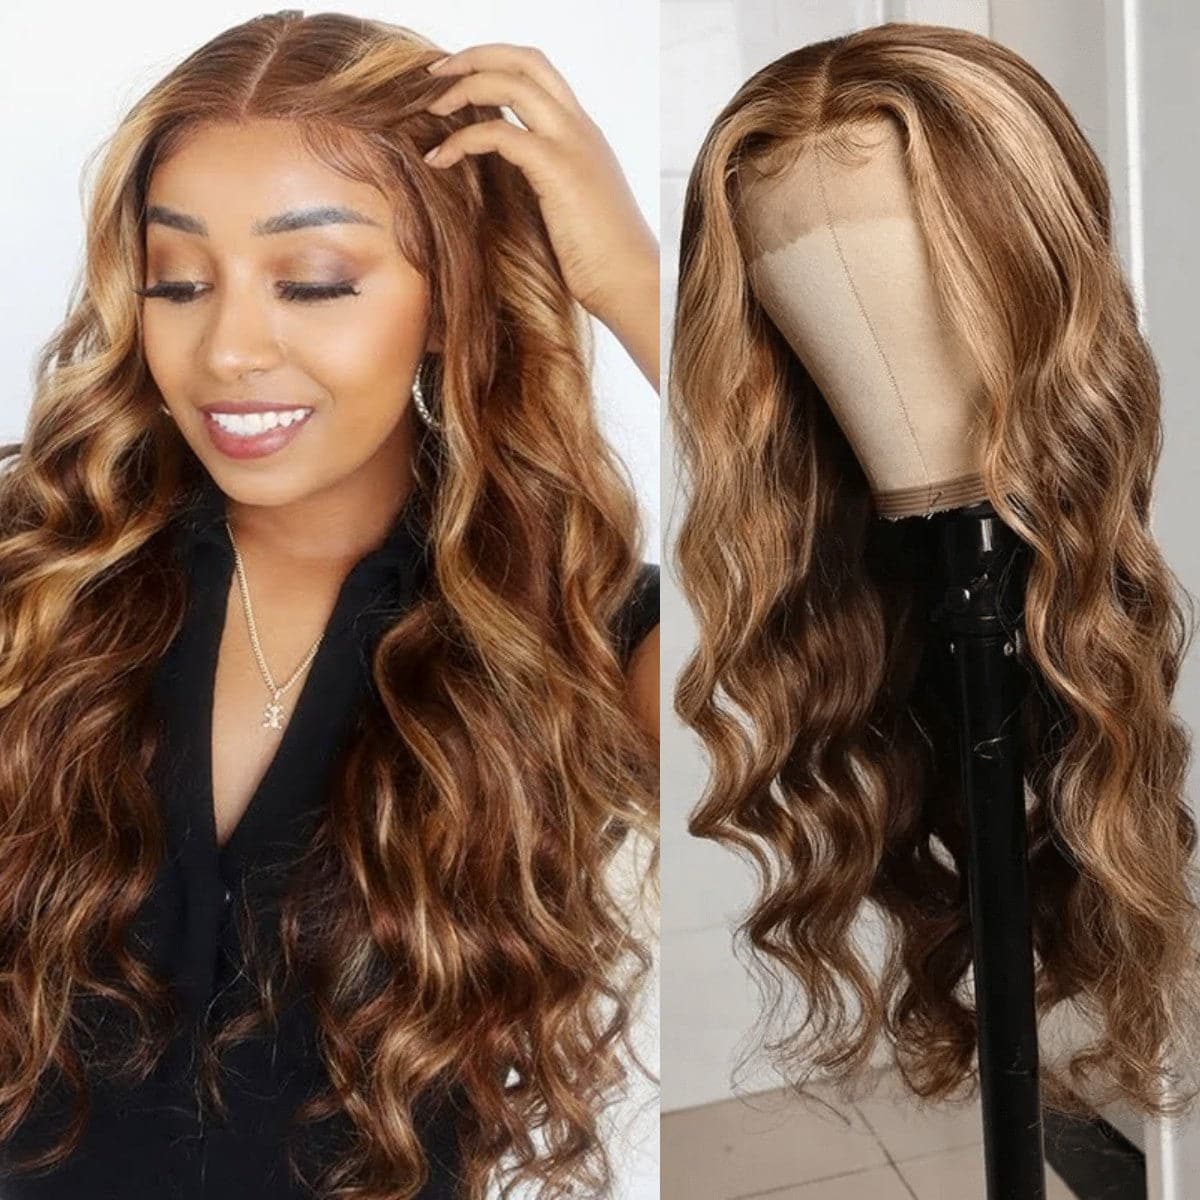 Limited Sale Urgirl Honey Blonde Highlight Body Wave 13x4 Lace Front Wigs 100% Virgin Human Hair Wigs